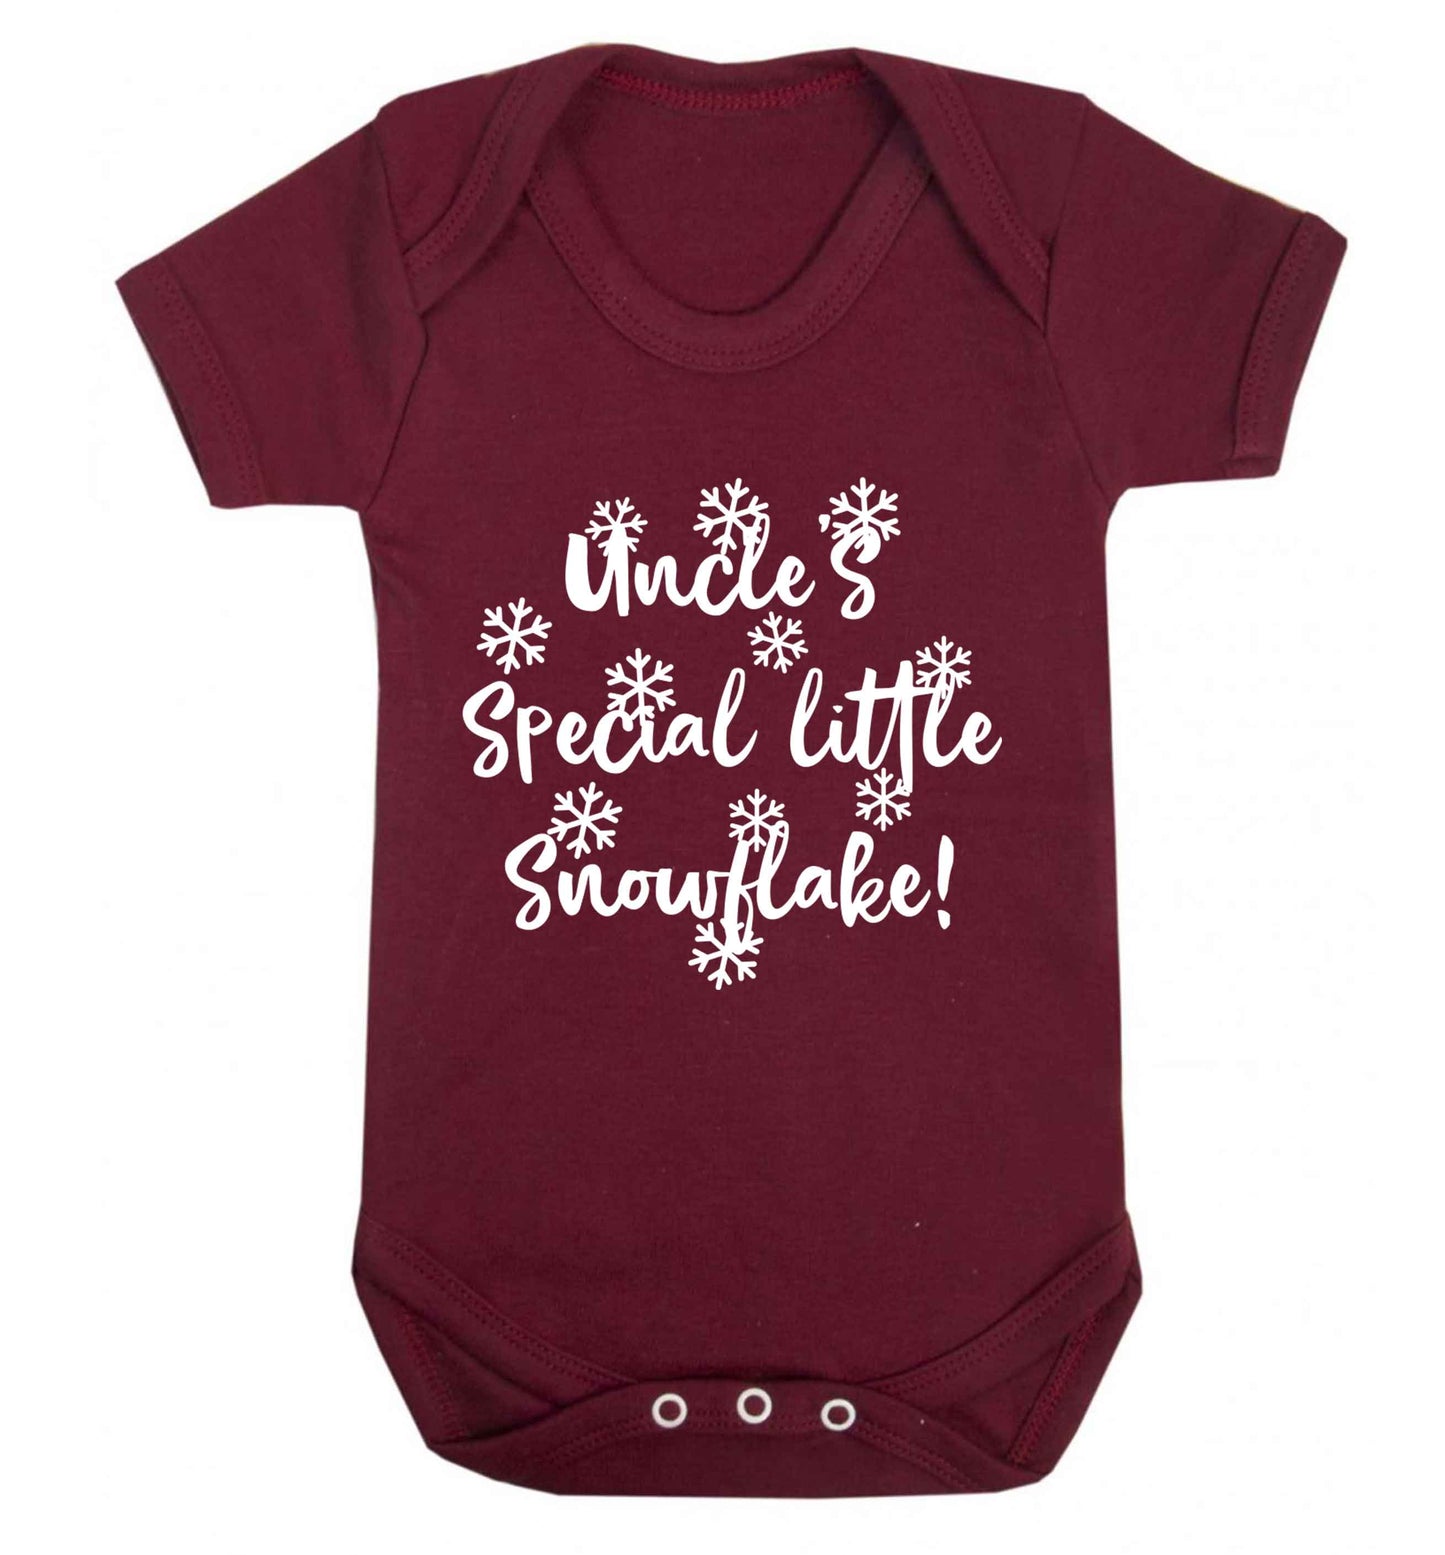 Uncle's special little snowflake Baby Vest maroon 18-24 months